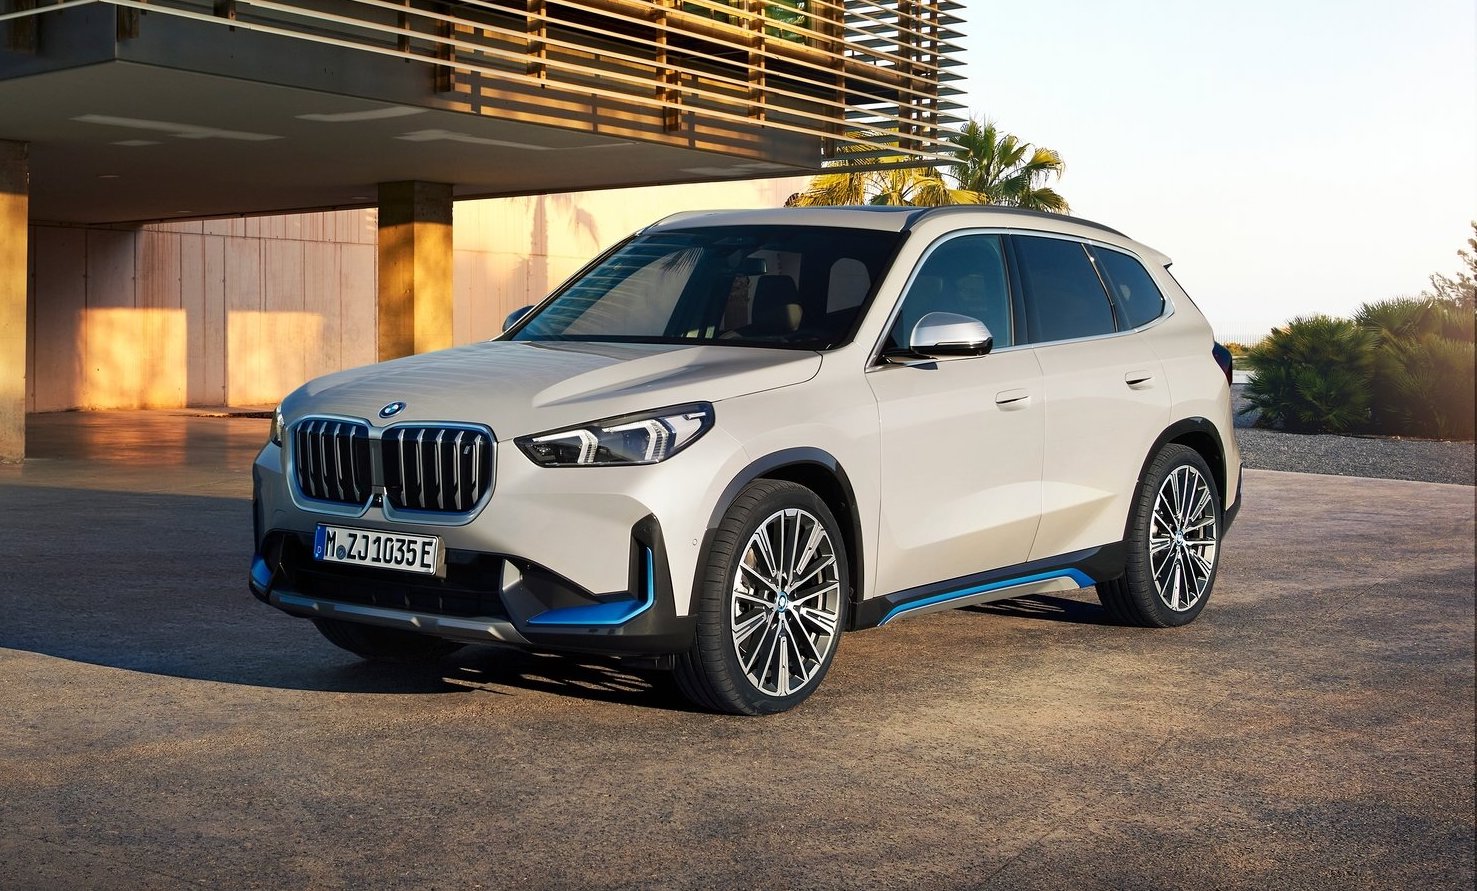 BMW iX1 on sale in Australia from $82,900, arrives Q1 2023